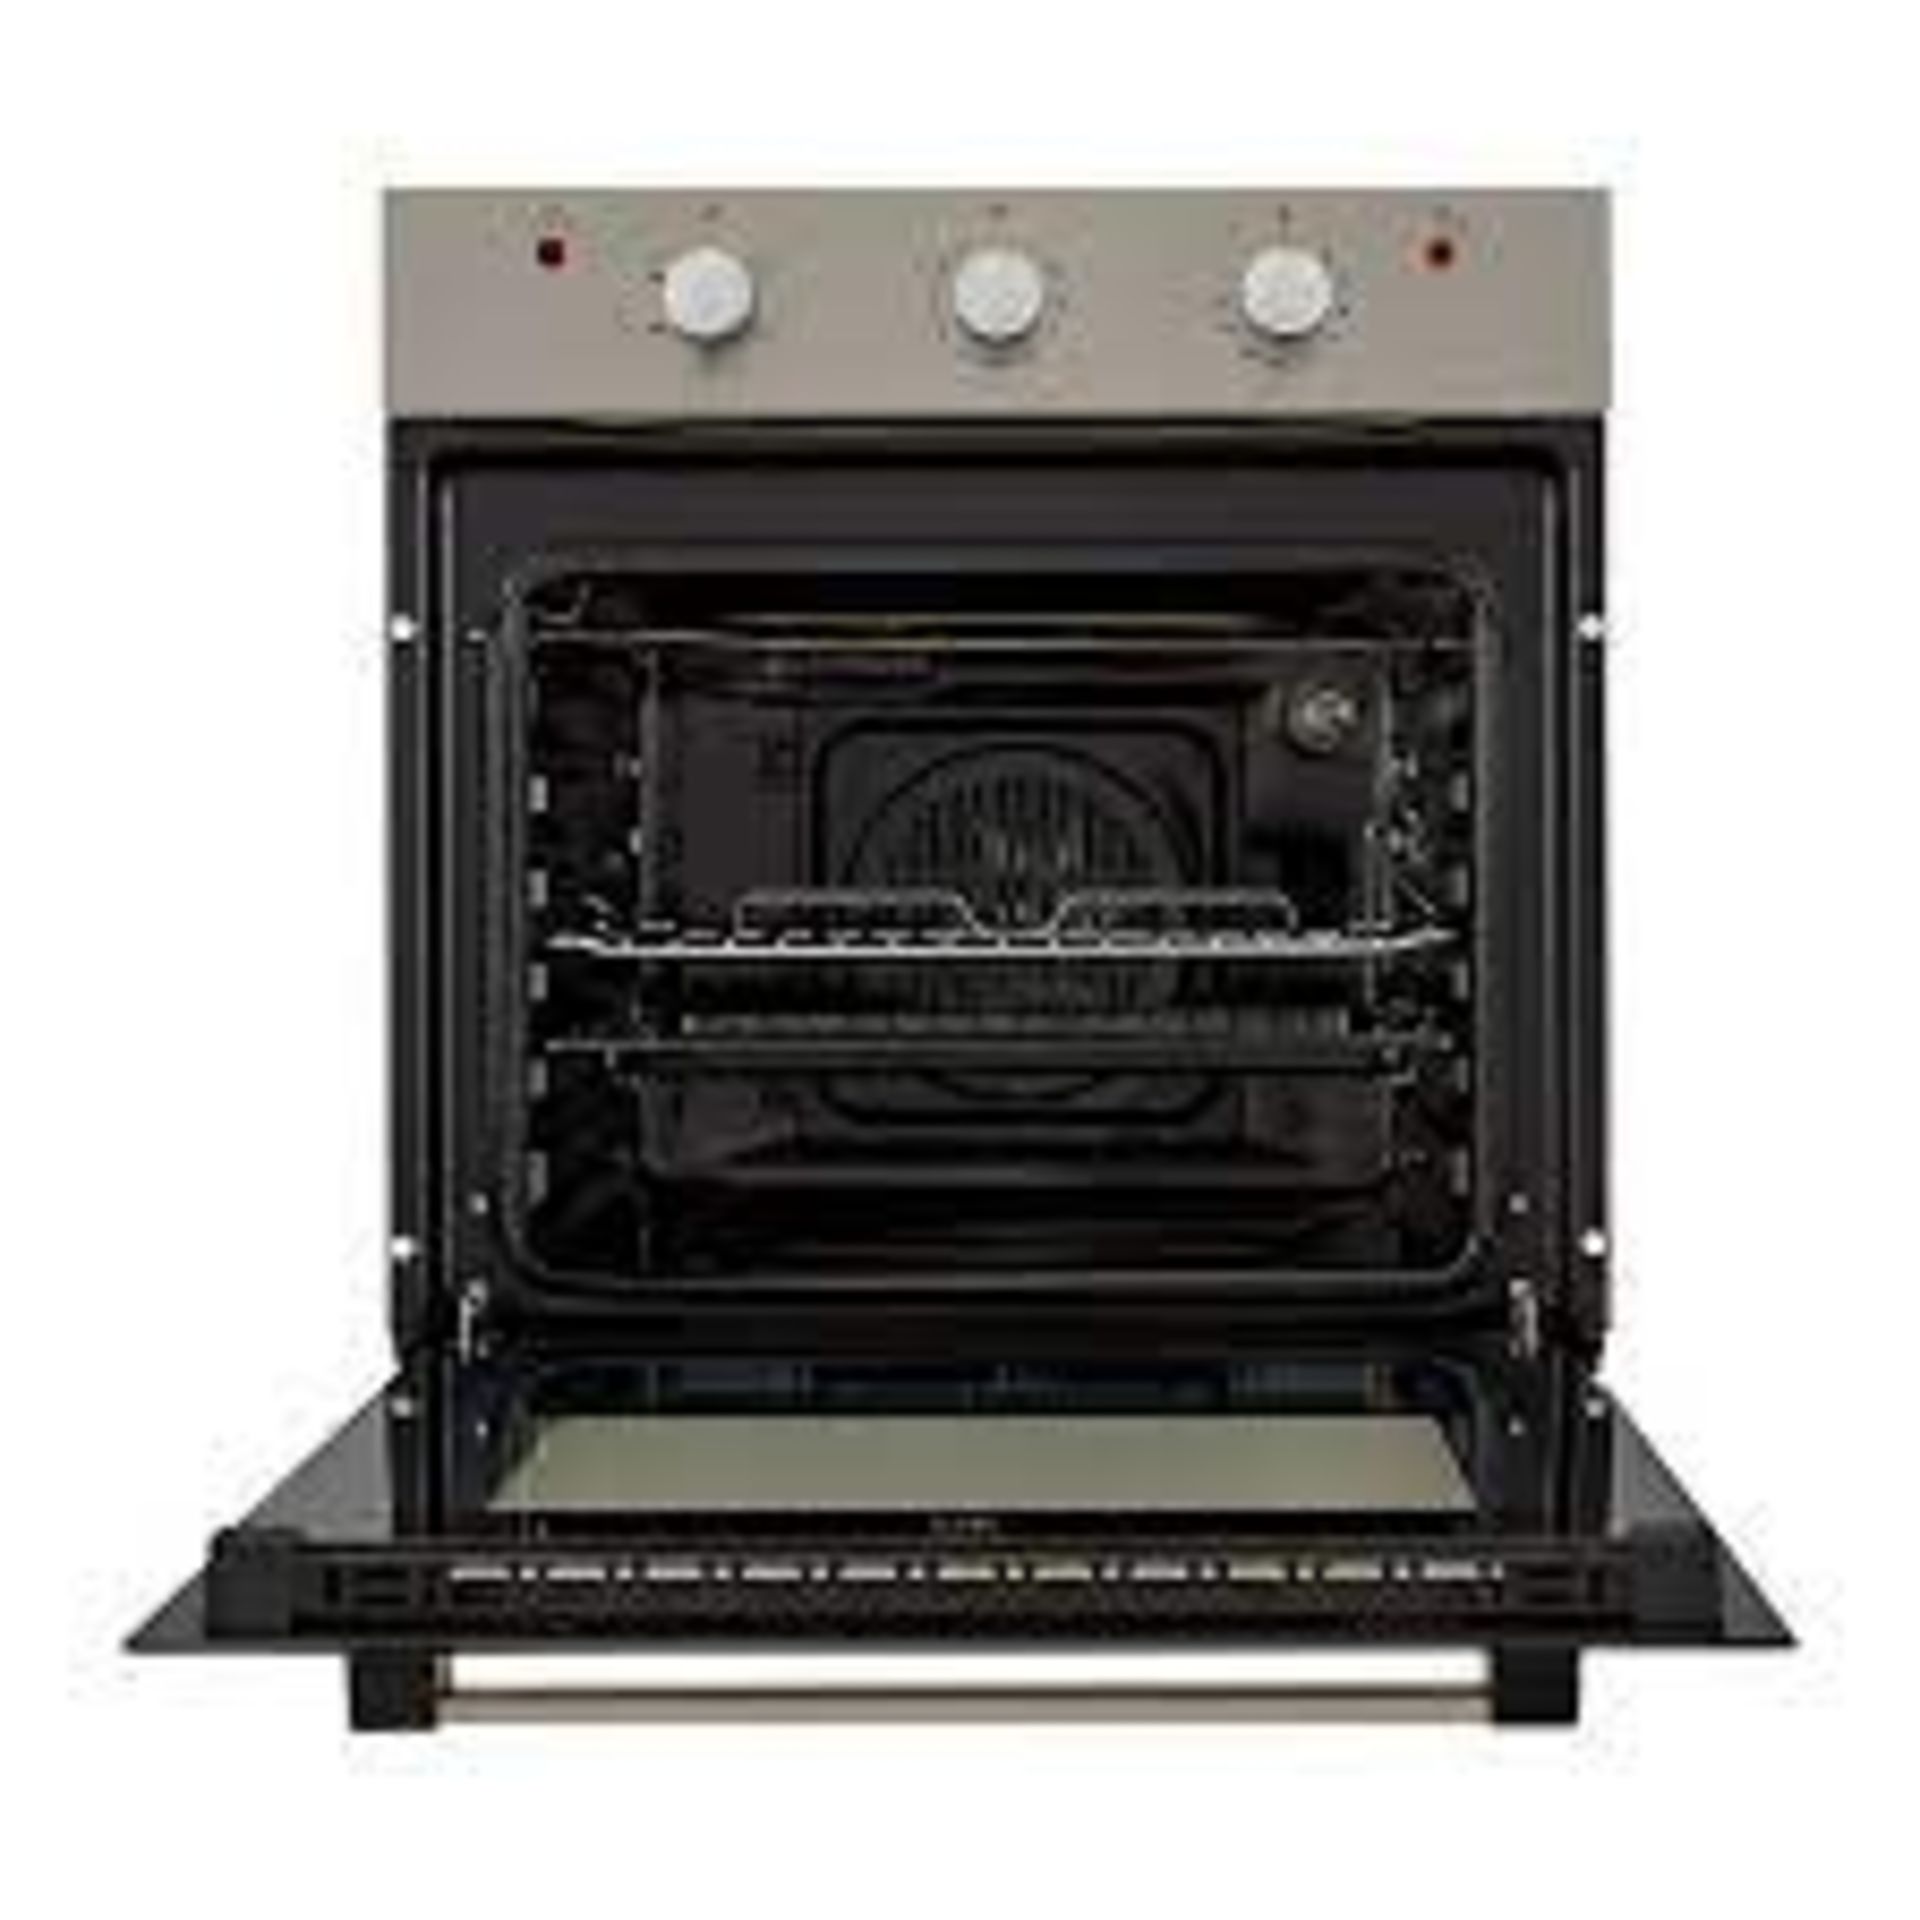 Cooke & Lewis CLFSB60 Built-in Single Fan Oven - Black. - R46. Enjoy cooking again with this black - Image 2 of 2